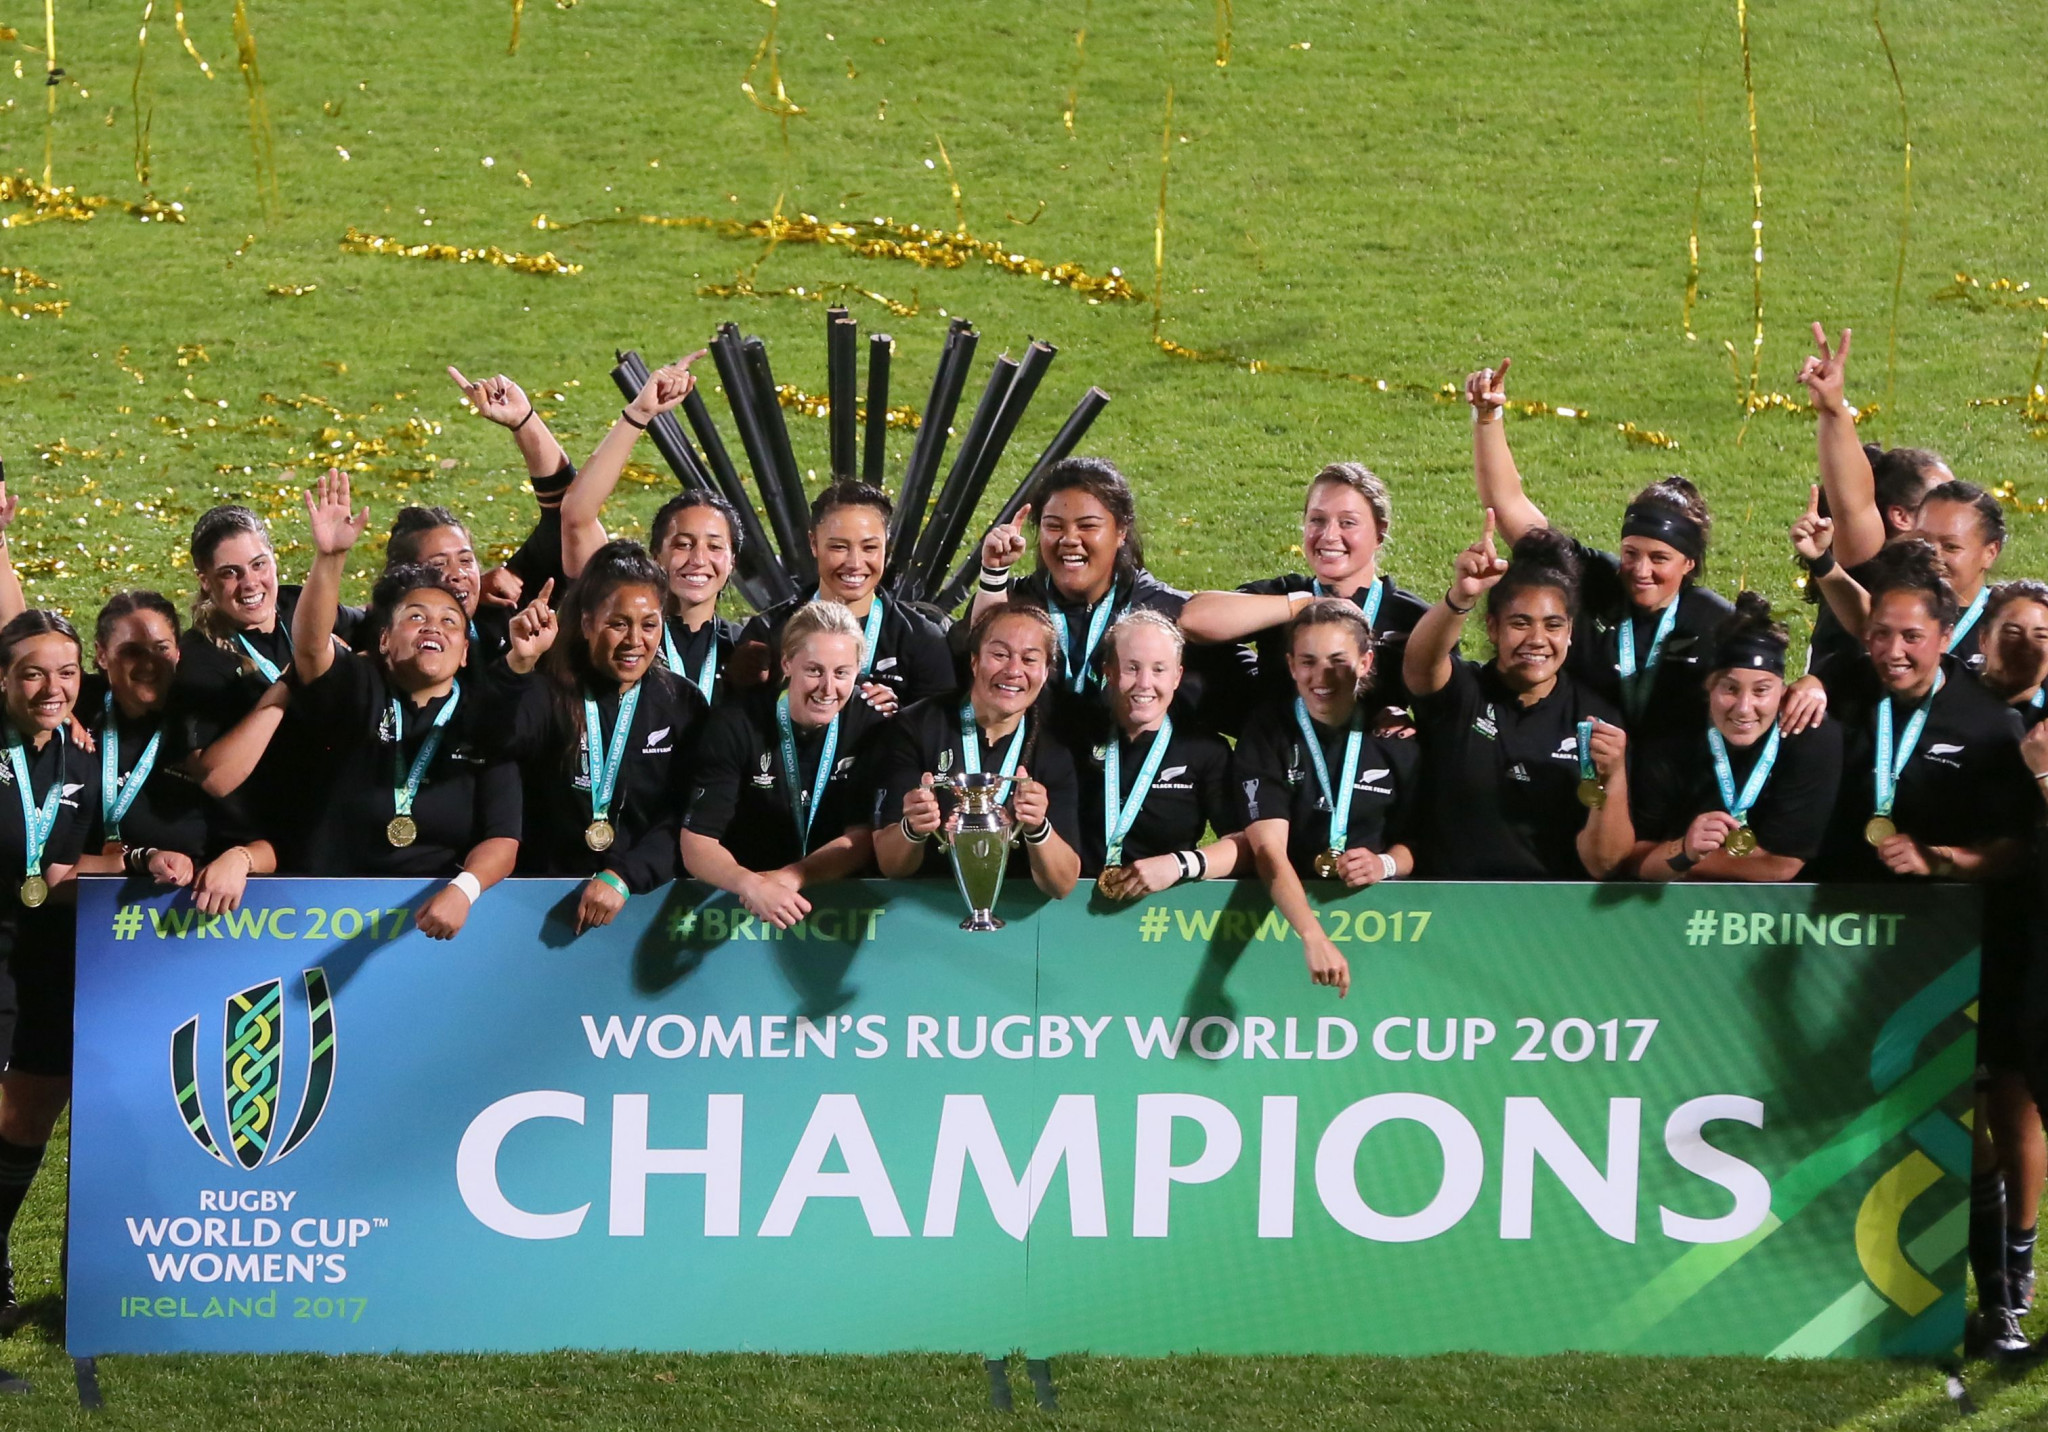 New Zealand won the Women's Rugby World Cup in Ireland last year for a record fifth time and will now the chance to defend the title before their home fans in 2021 ©Getty Images